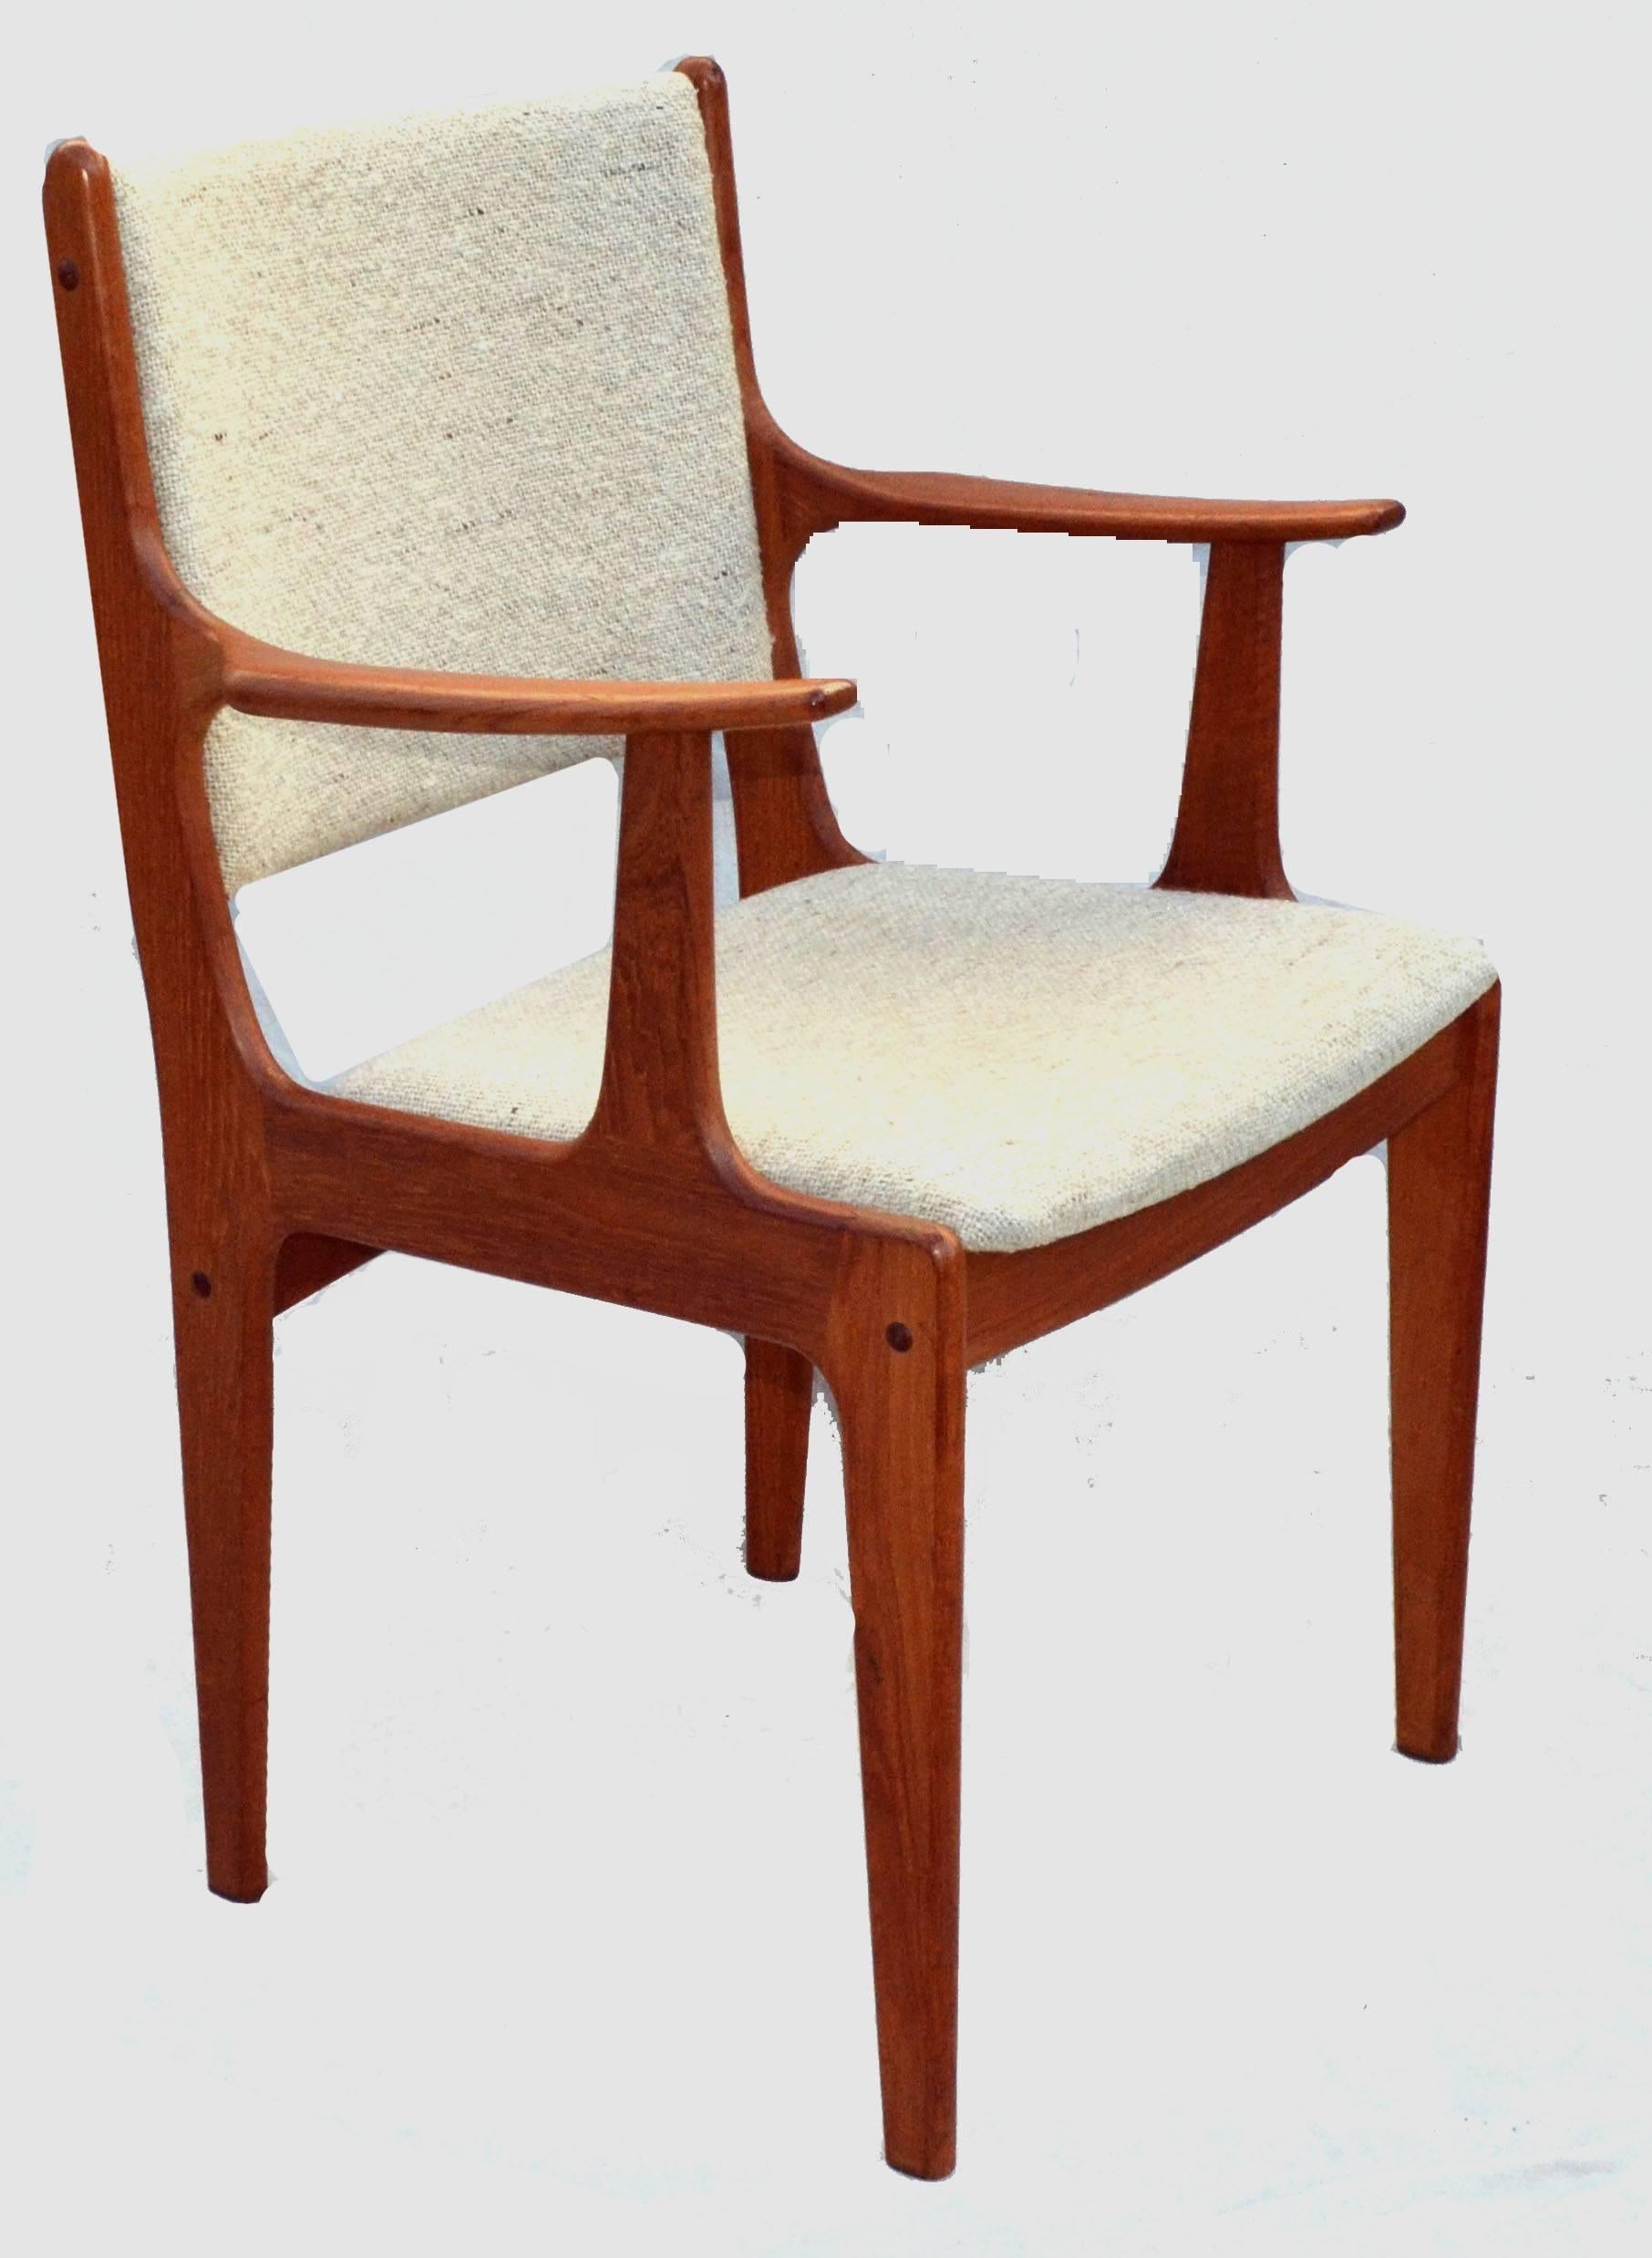 Mid-Century teak Danish modern chair with original worsted wool covers. Possible by D-Scan, a Danish furniture company and these were made in Indonesia during the late 1960's. Size: 34.5